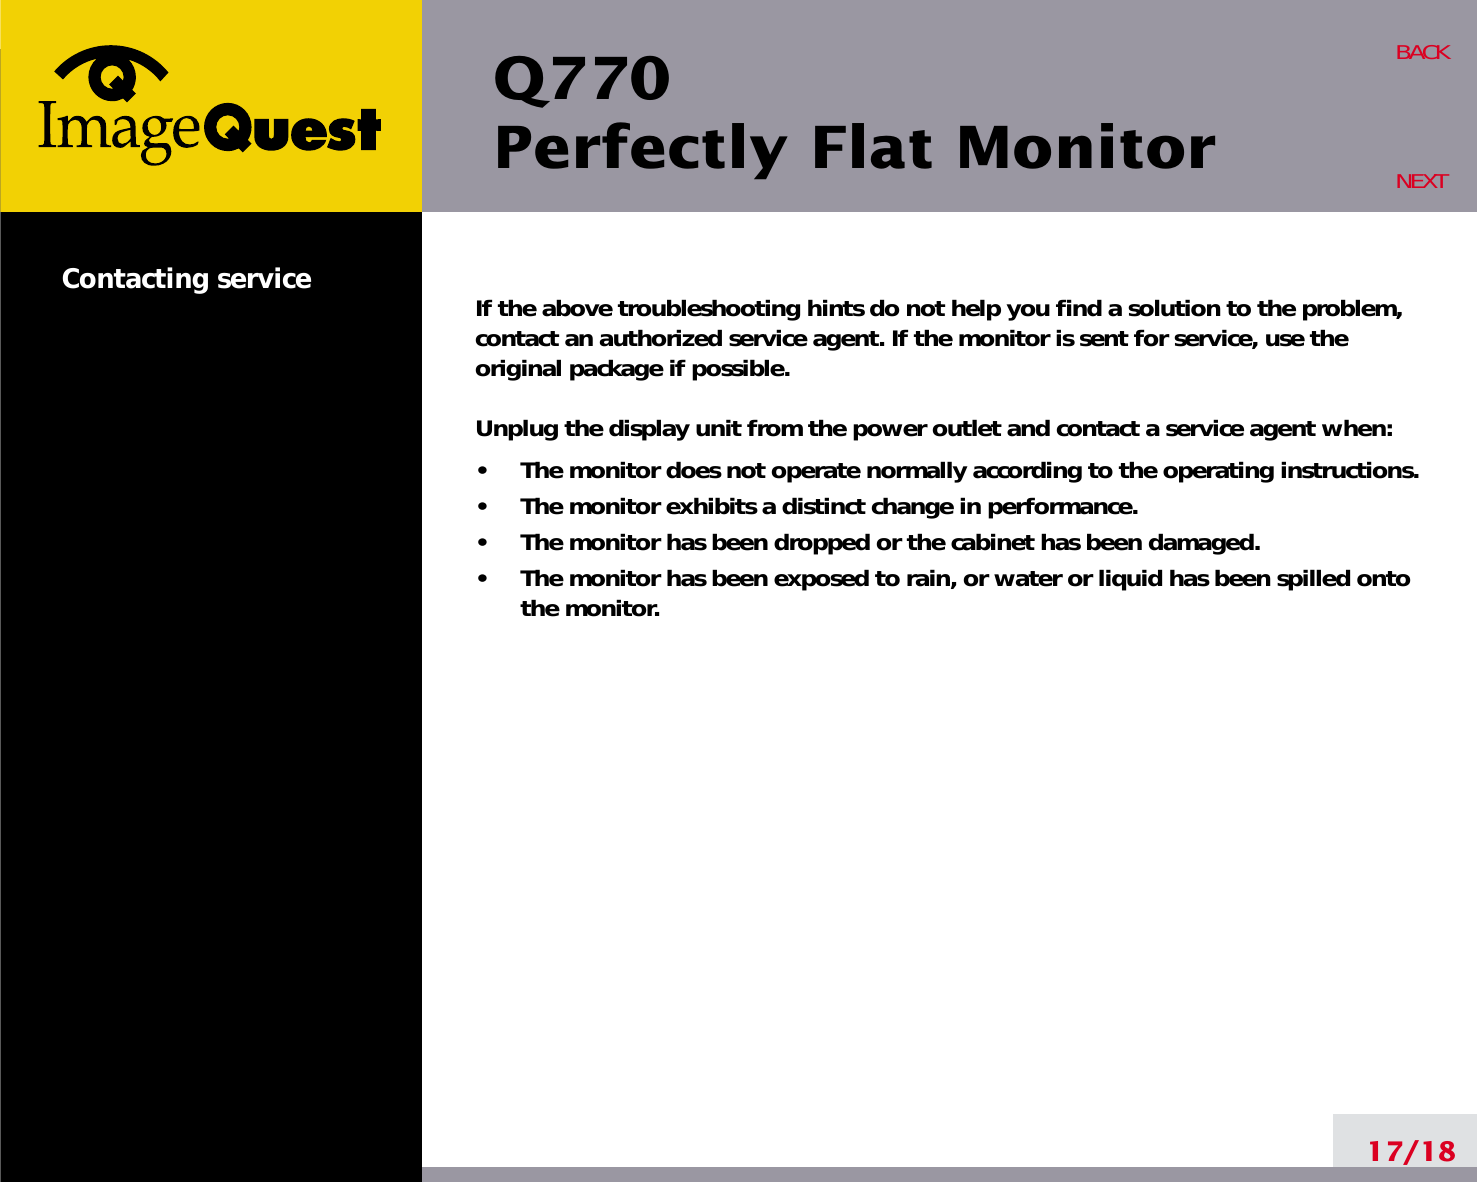 Q770Perfectly Flat MonitorIf the above troubleshooting hints do not help you find a solution to the problem,contact an authorized service agent. If the monitor is sent for service, use theoriginal package if possible.Unplug the display unit from the power outlet and contact a service agent when:•     The monitor does not operate normally according to the operating instructions.•     The monitor exhibits a distinct change in performance.•     The monitor has been dropped or the cabinet has been damaged.•     The monitor has been exposed to rain, or water or liquid has been spilled ontothe monitor.17/18BACKNEXTContacting service